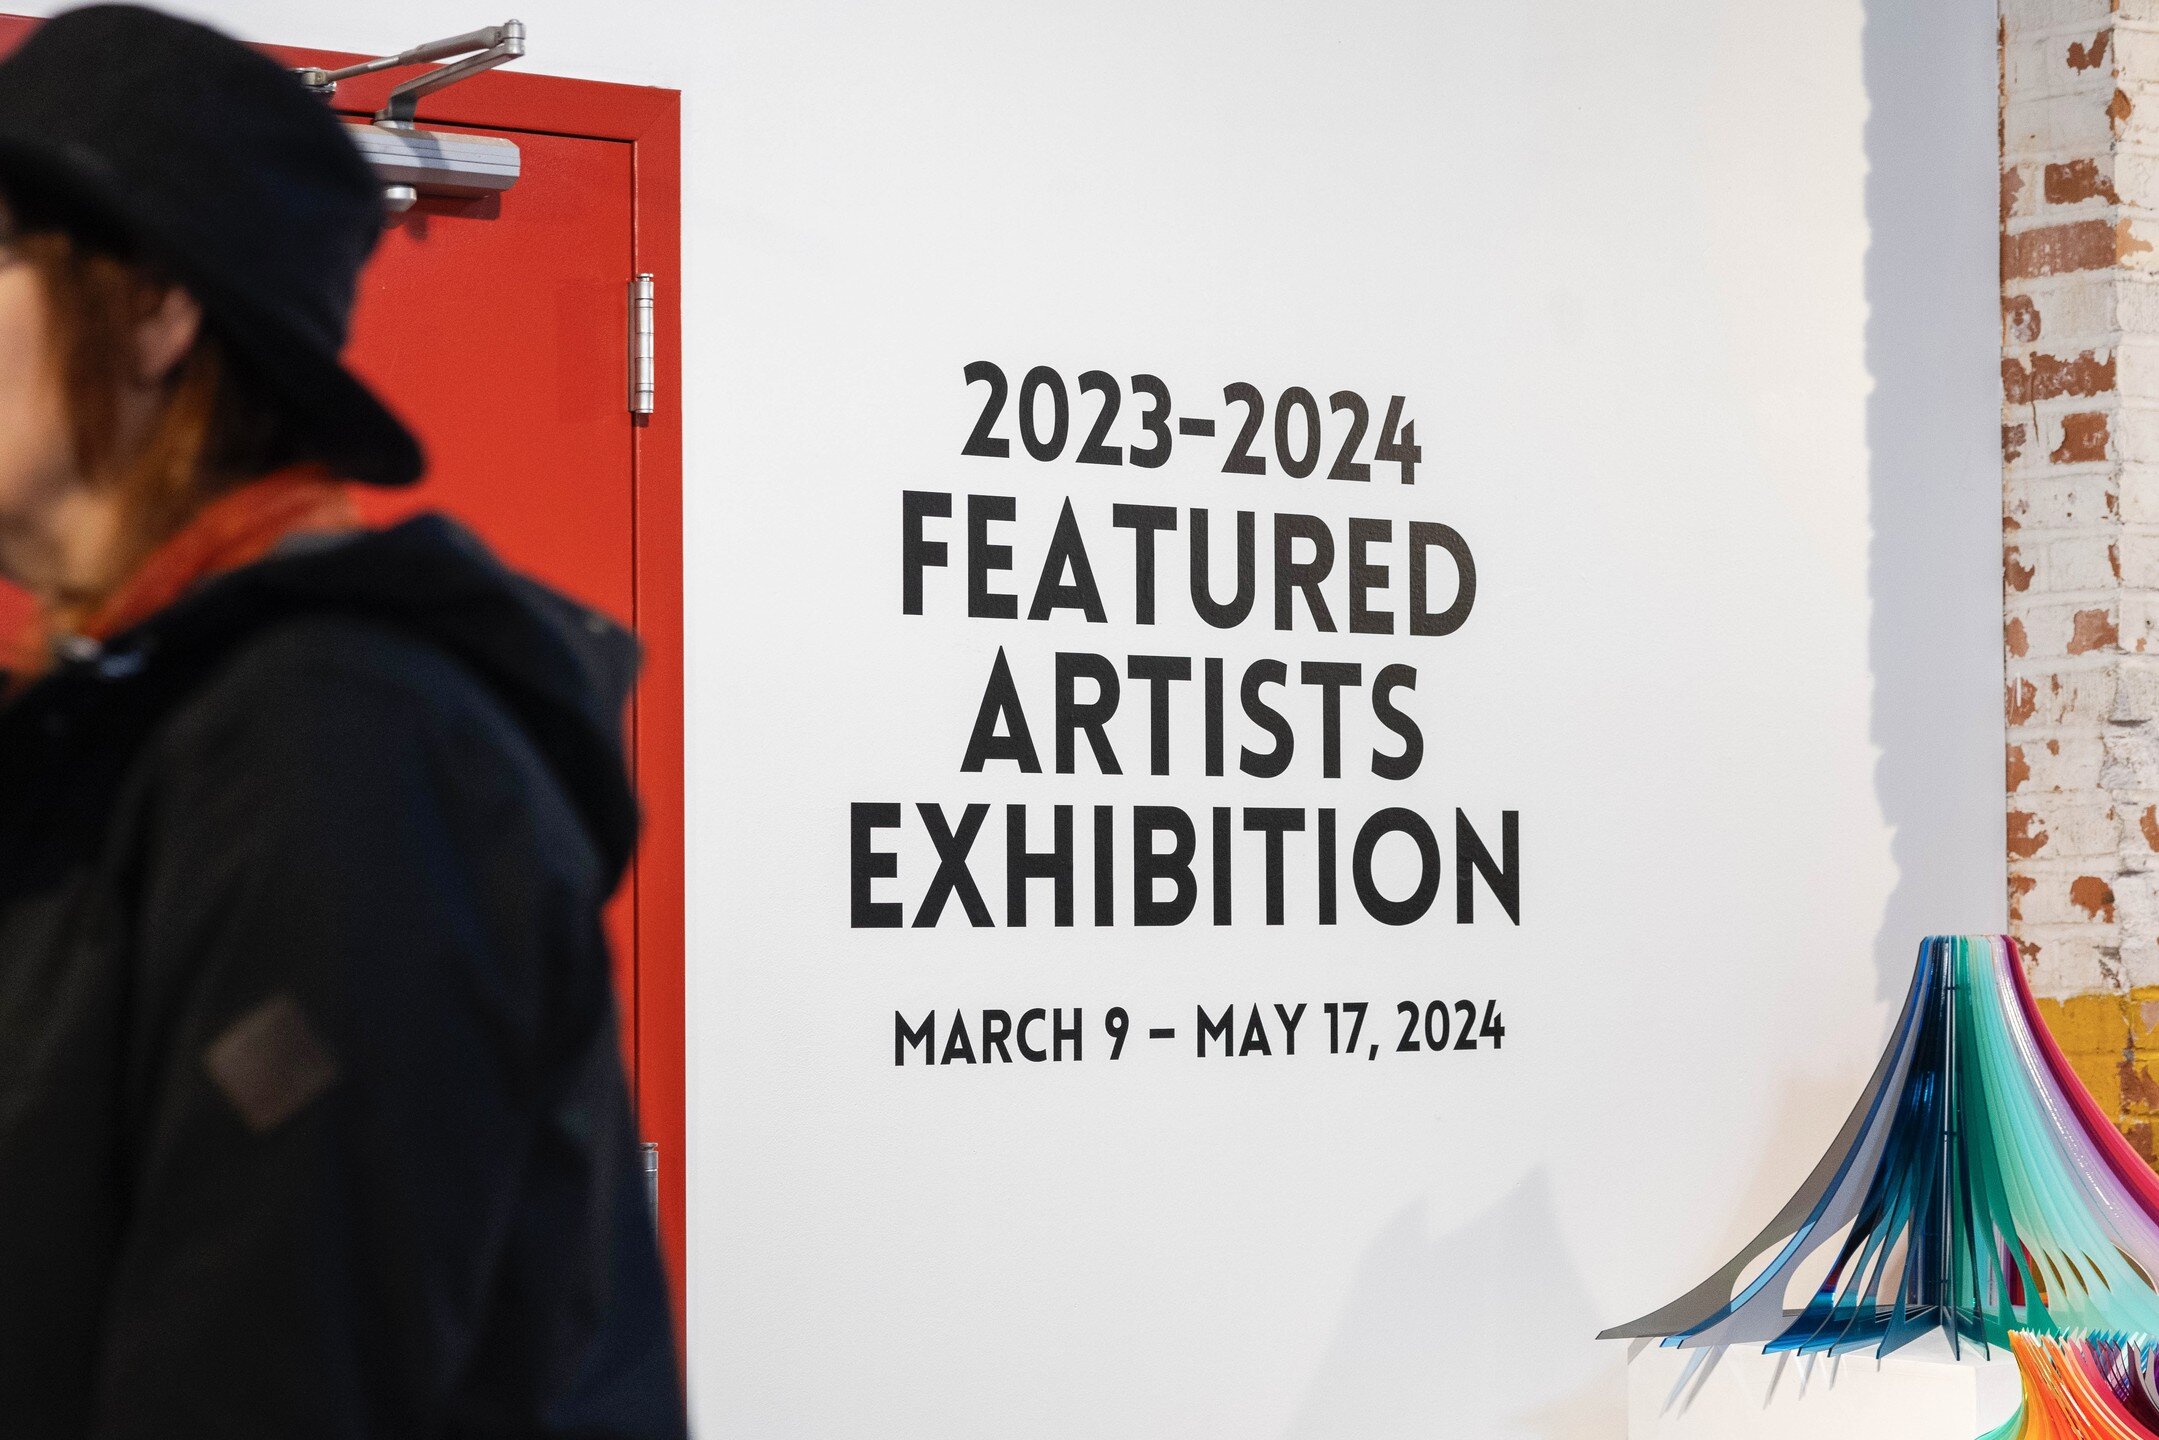 Thank you to everyone that came of to the opening reception of the 2023-2024 Featured Artists Exhibition! Missed it? The show will be open til May 17th!

For more information about the show click the link in our bio. #linkinbio

All photos by Chris U